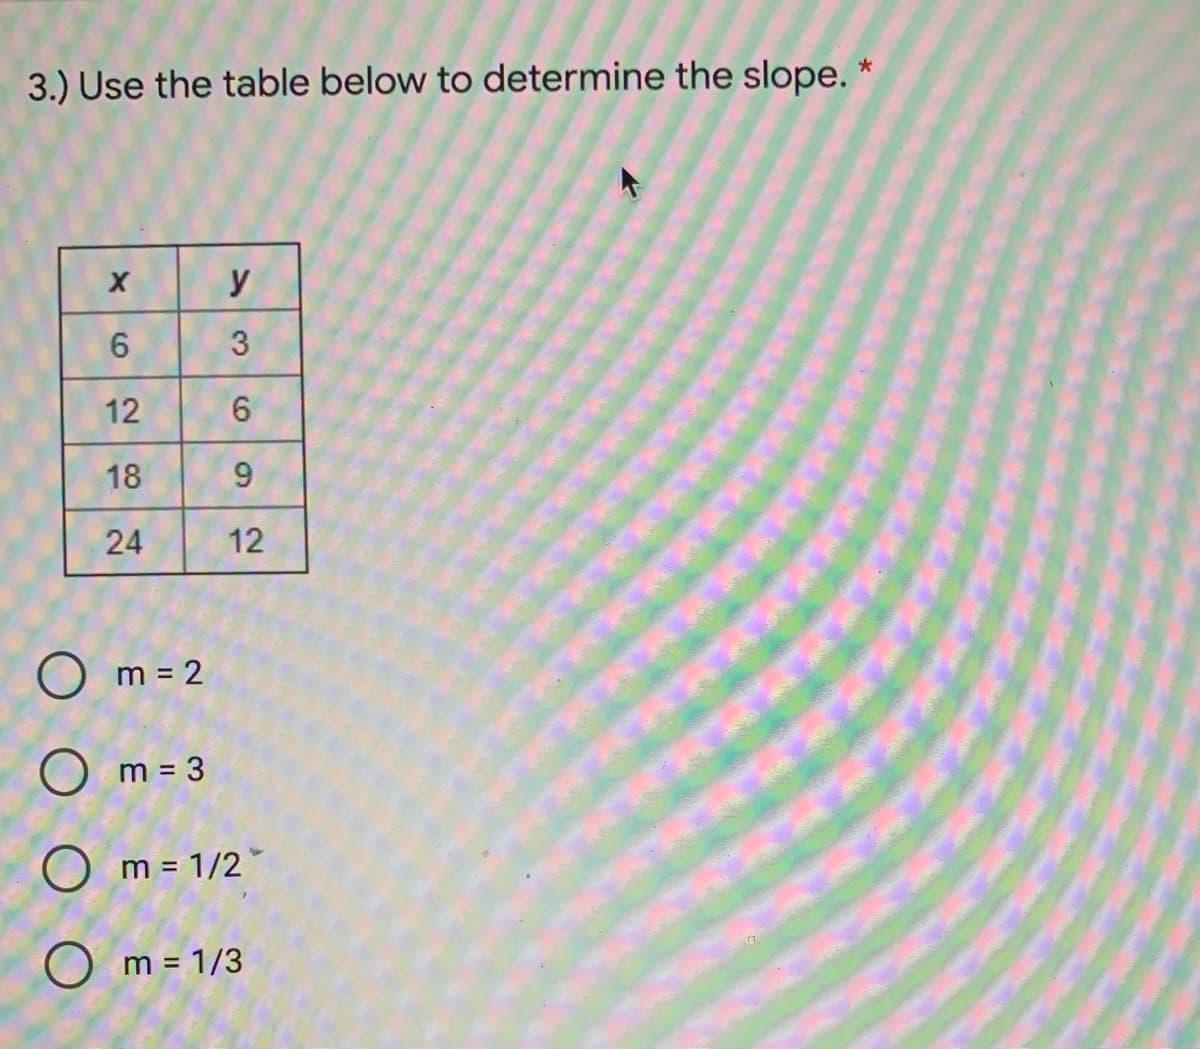 3.) Use the table below to determine the slope.
y
6
12
18
24
12
m = 2
m = 3
%3D
Om = 1/2*
O m = 1/3
3.
6,
9,
